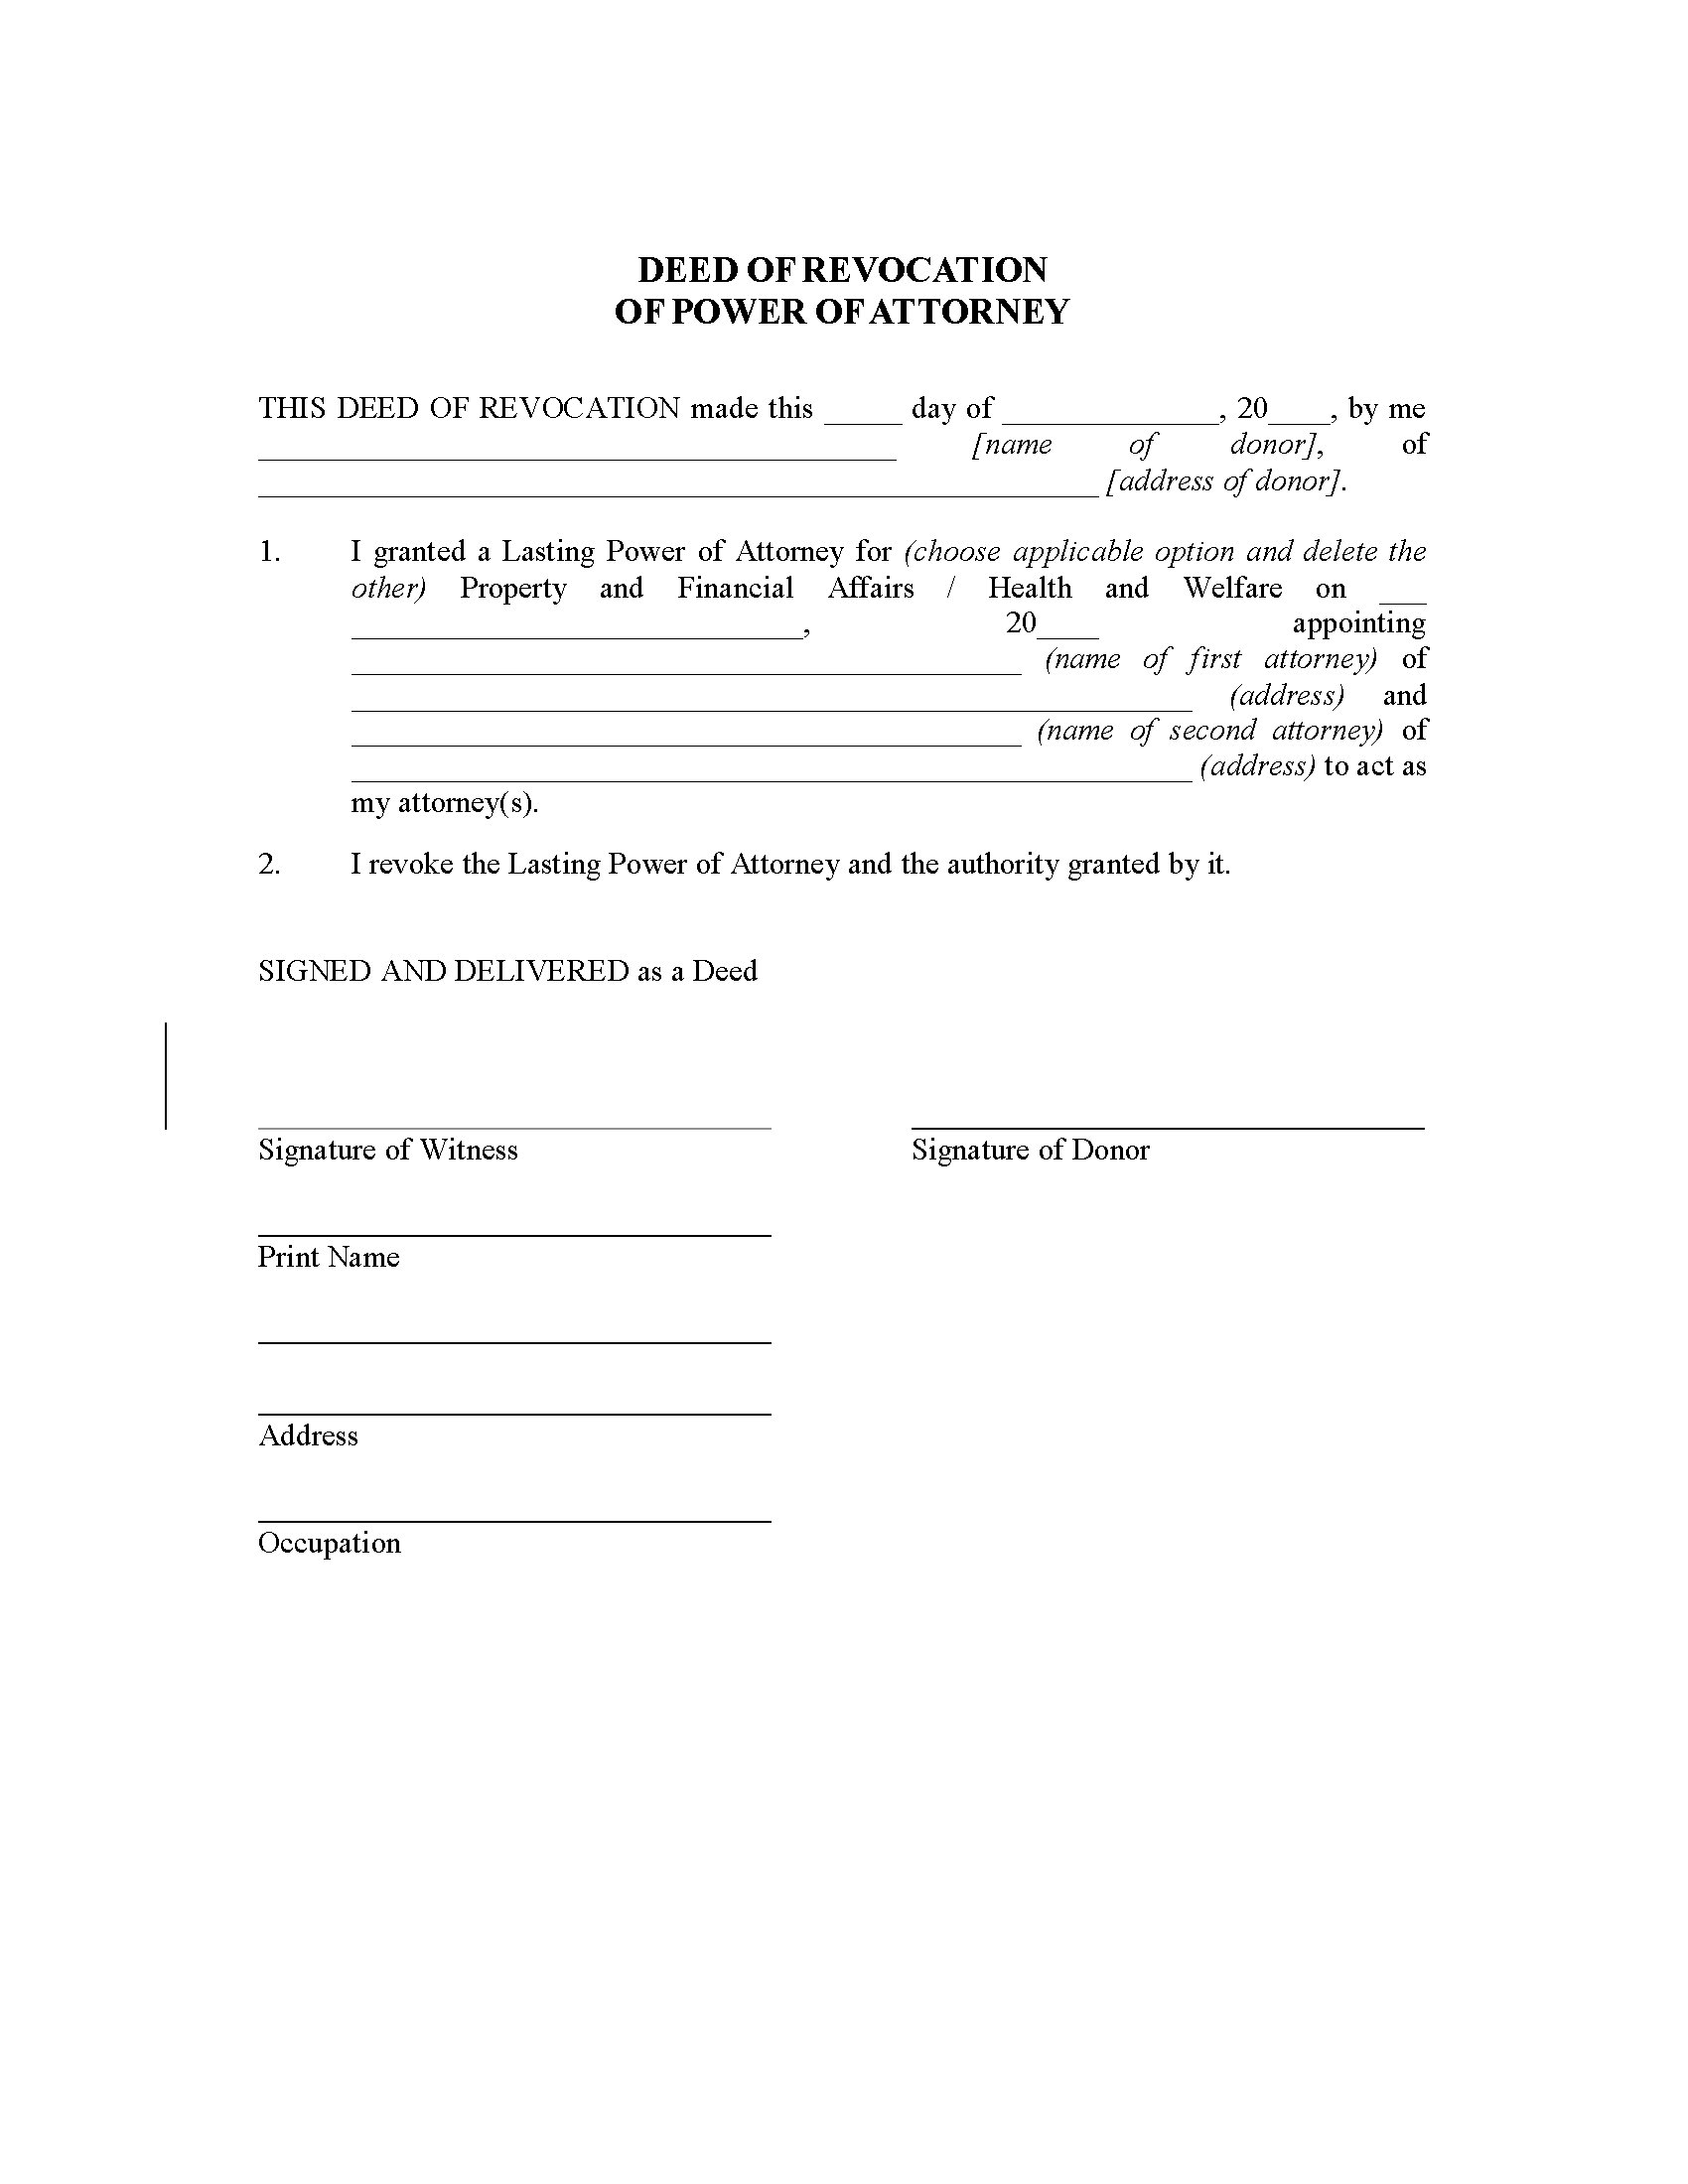 UK Deed of Revocation of Power of Attorney | Legal Forms ...